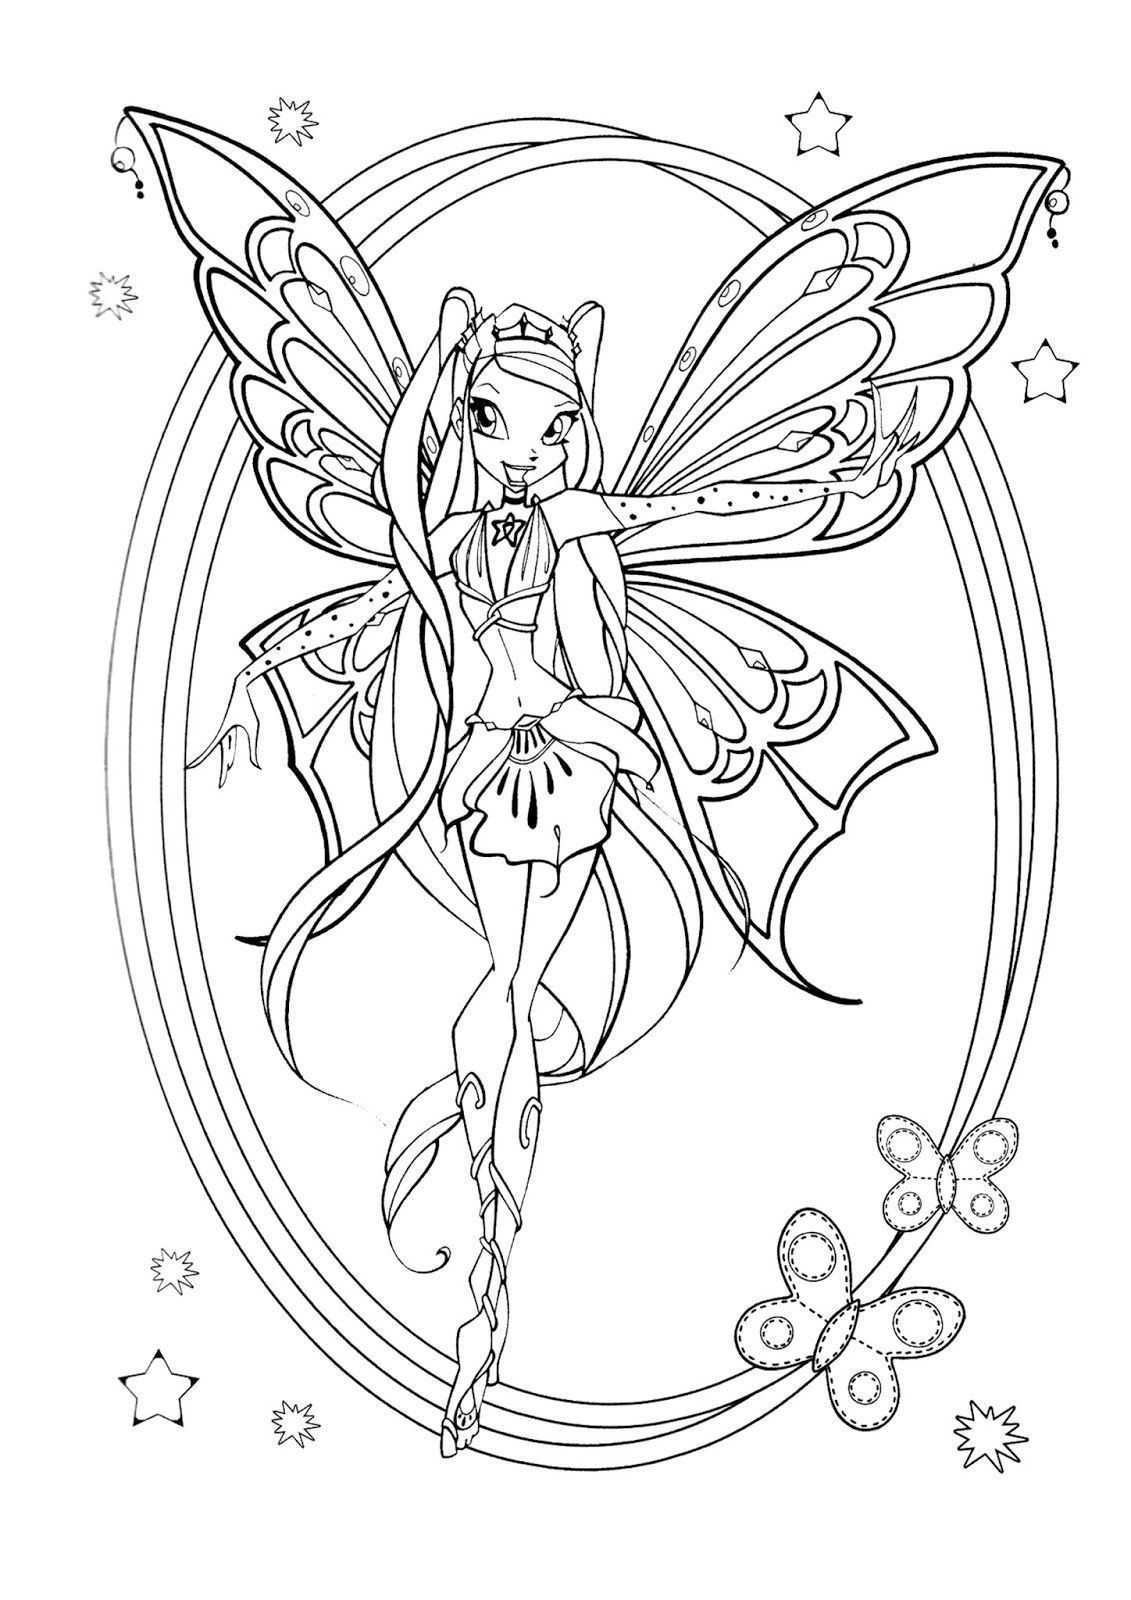 Winx Club Coloring Pages Best Of Awesome Musa Winx Coloring Pages Fansites Fairy Coloring Pages Coloring Pages Cartoon Coloring Pages